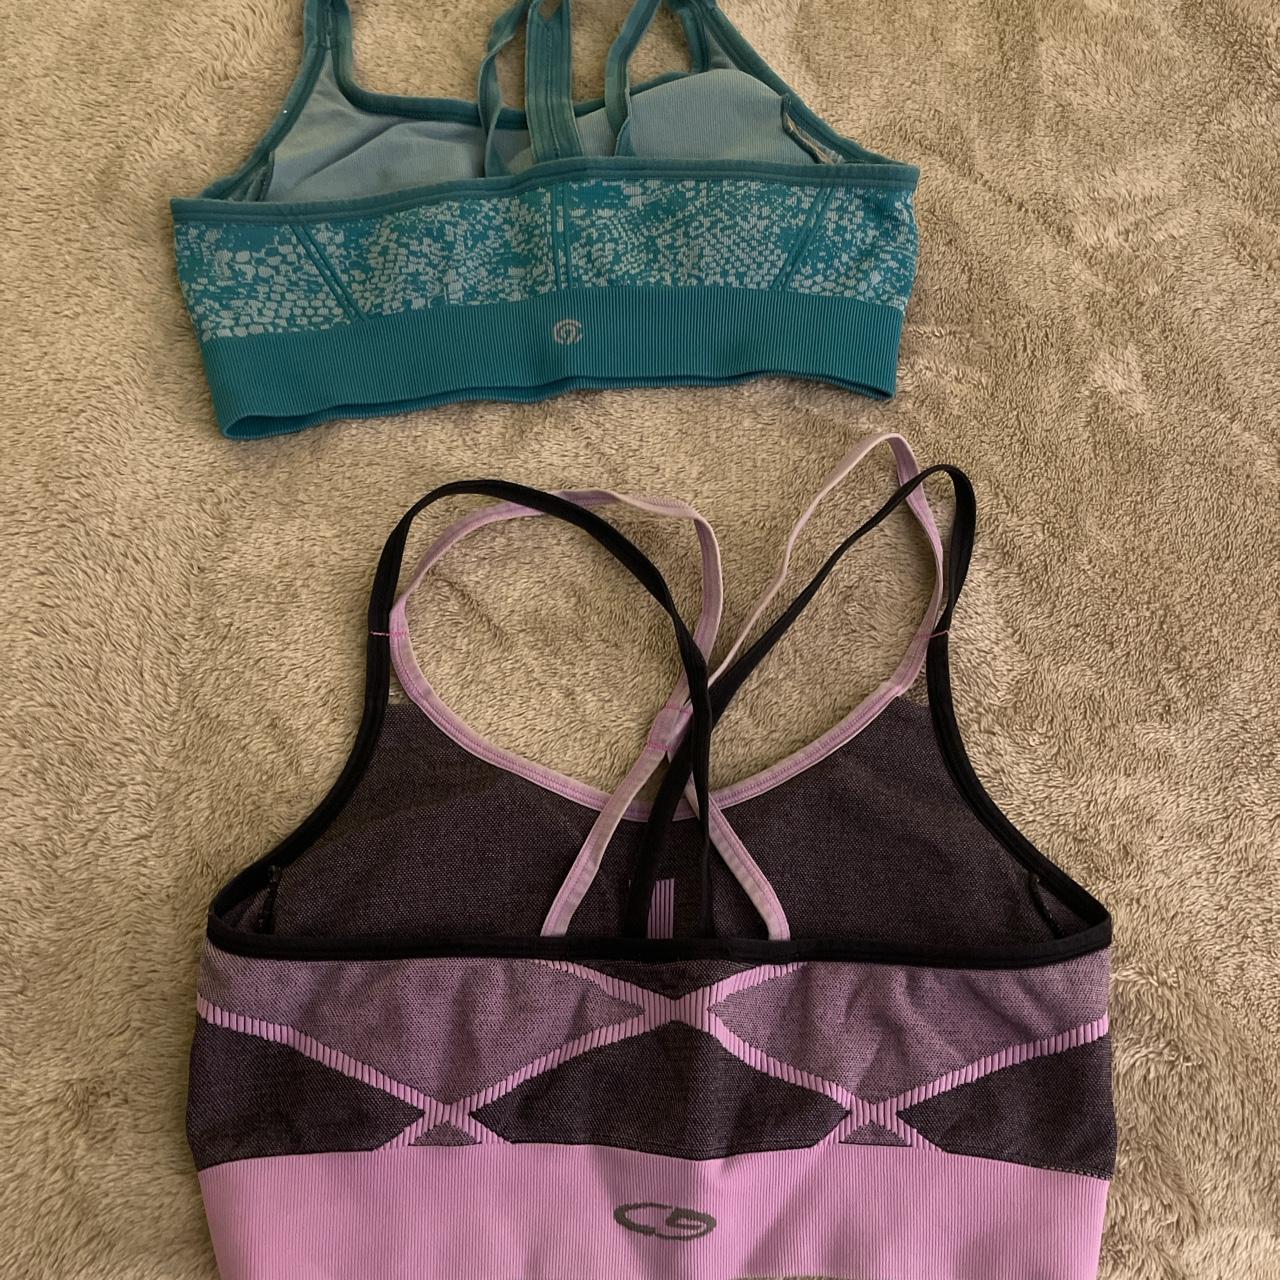 C9 Champion from Target Sports Bra #exercise #workout - Depop